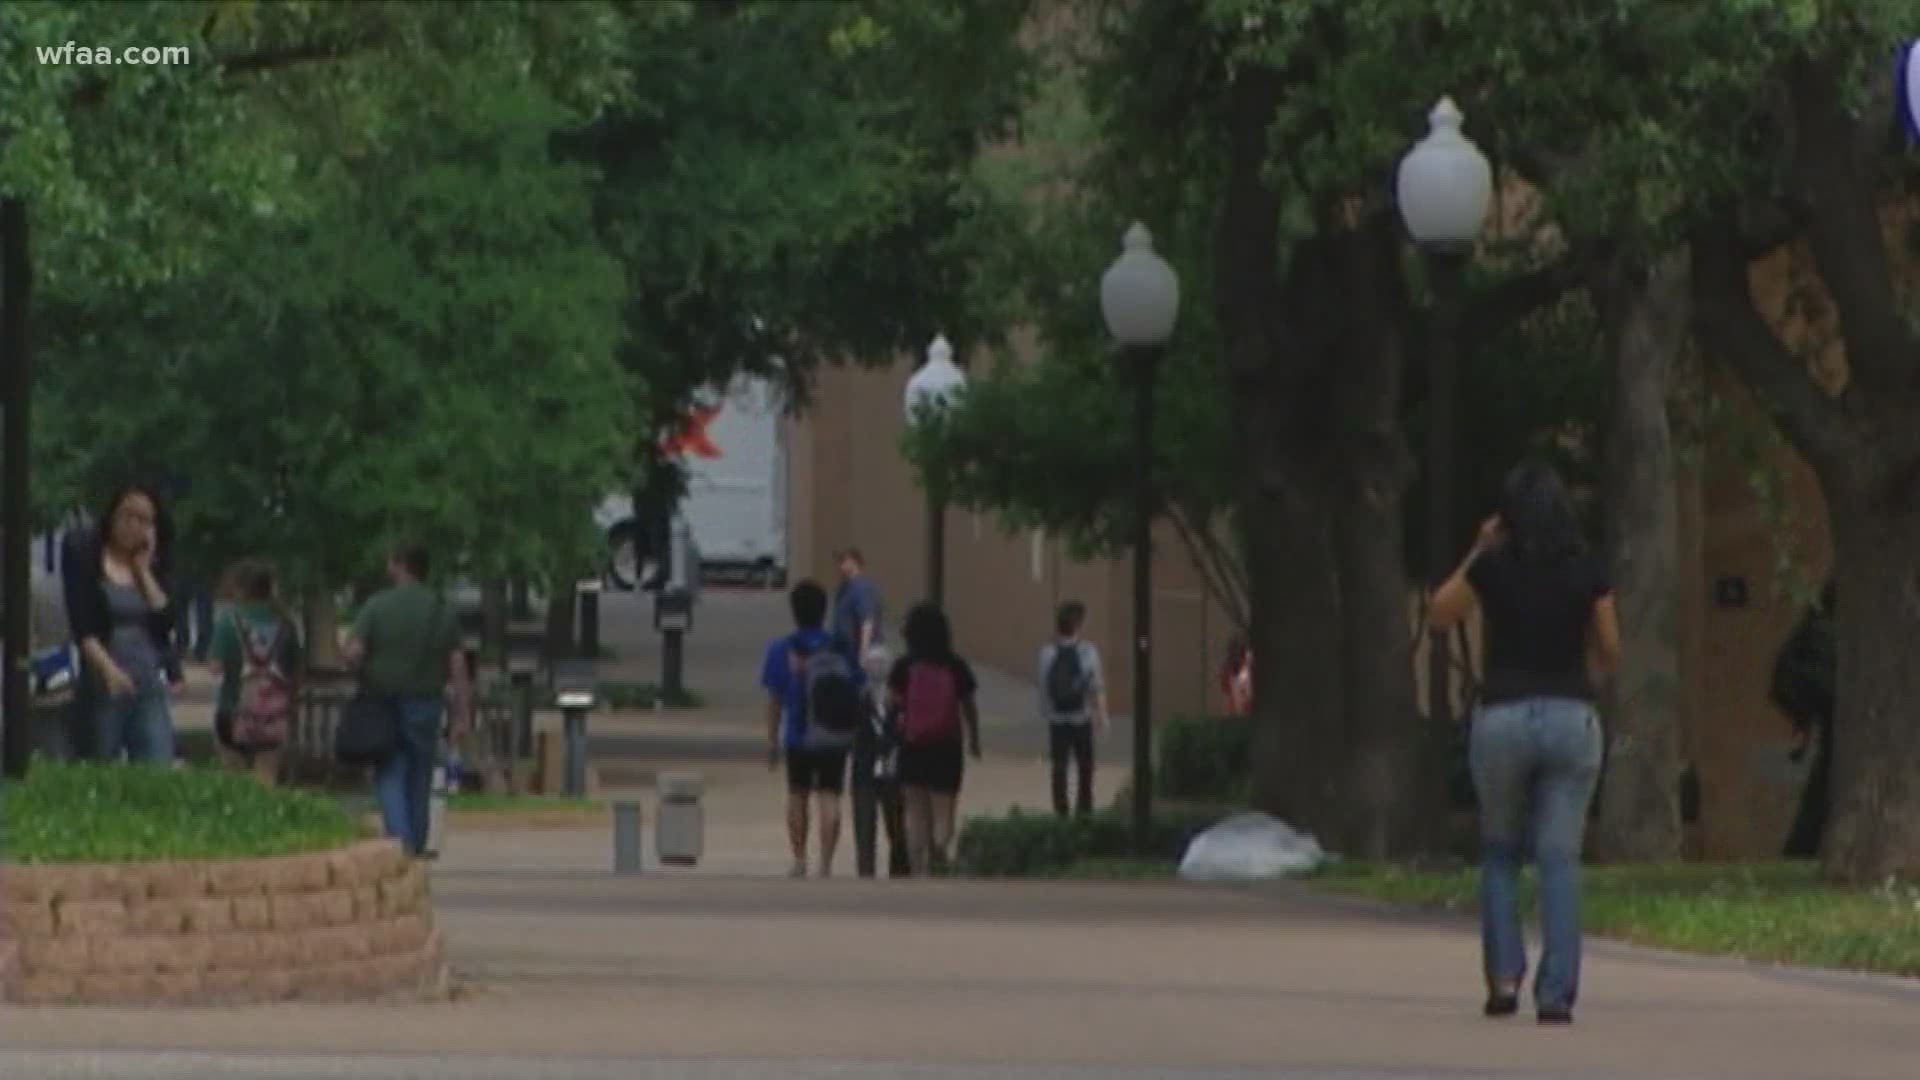 While UT Arlington is getting ready to begin, the Texas Faculty Association is demanding for Gov. Abbott to delay campus opening until Sept. 8.